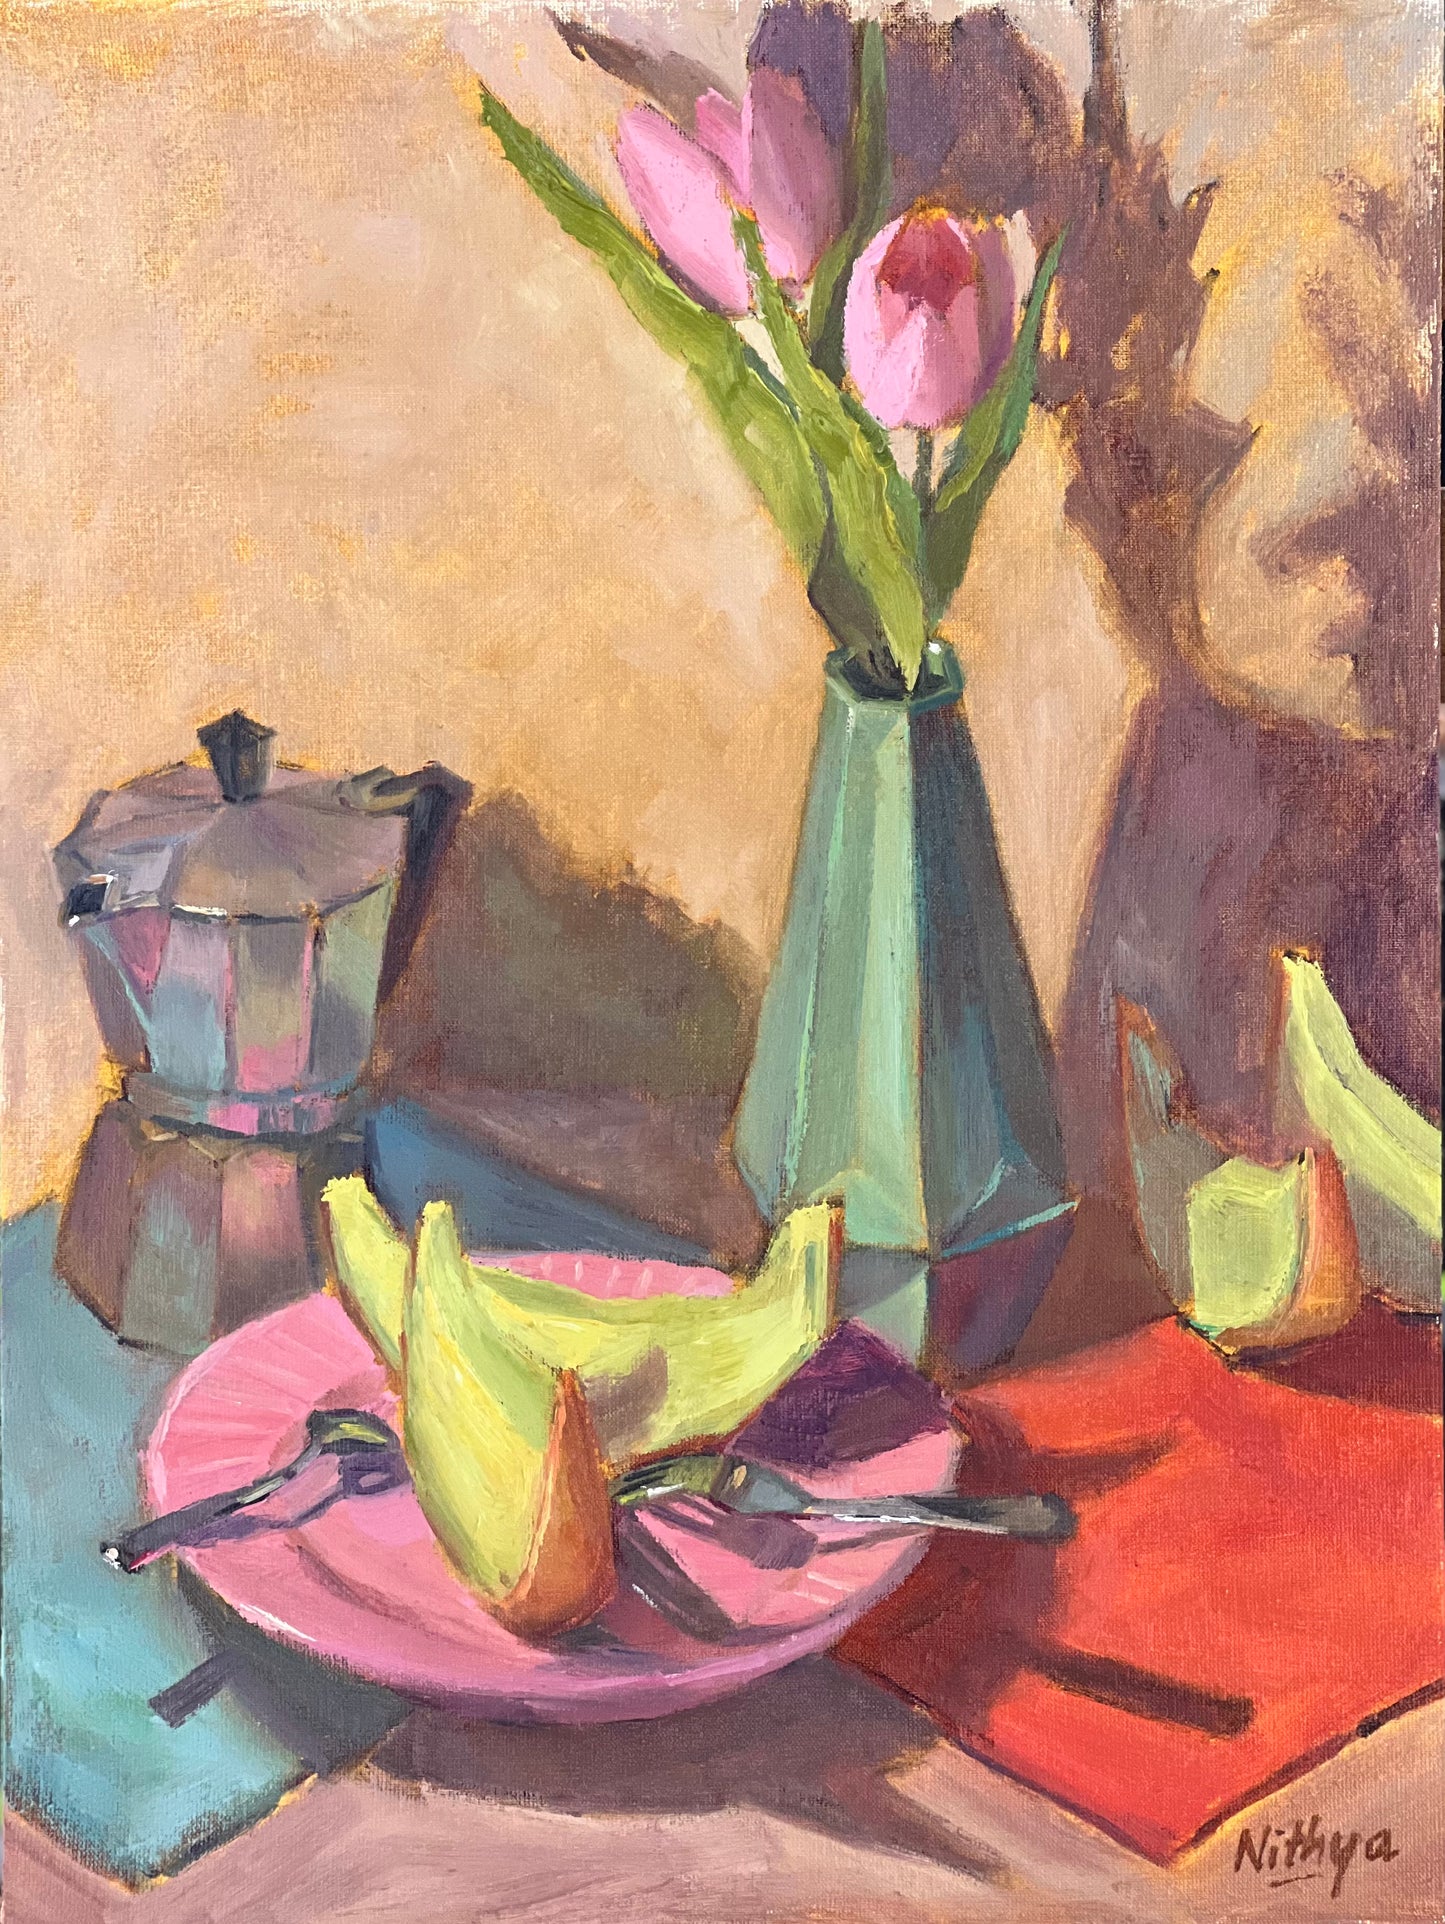 Original Oil Painting - Tulips and Melon Slices